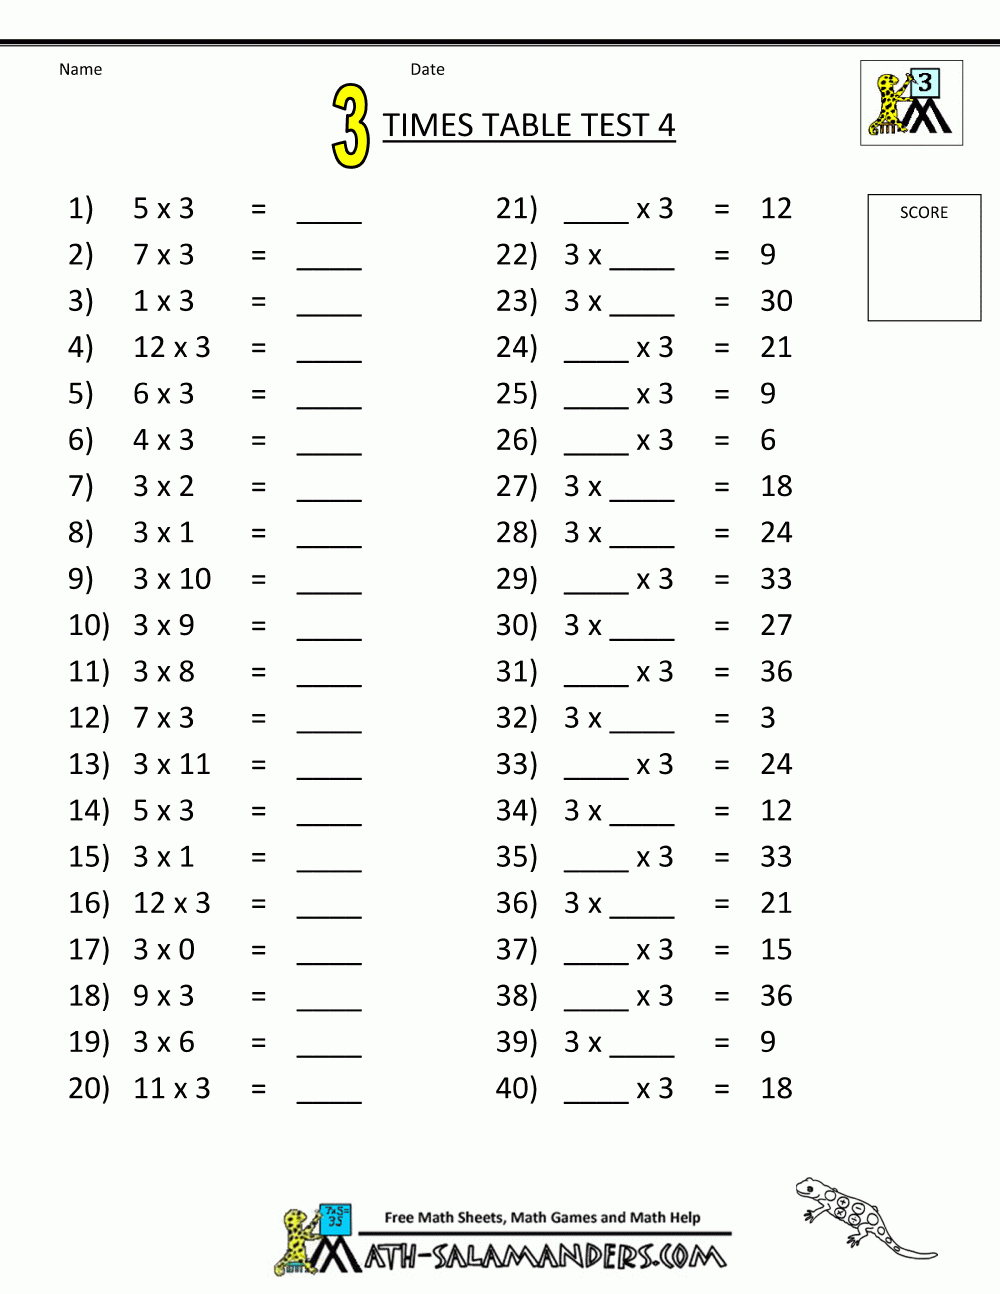 Times Table Tests - 2 3 4 5 10 Times Tables | Test Worksheets Printable